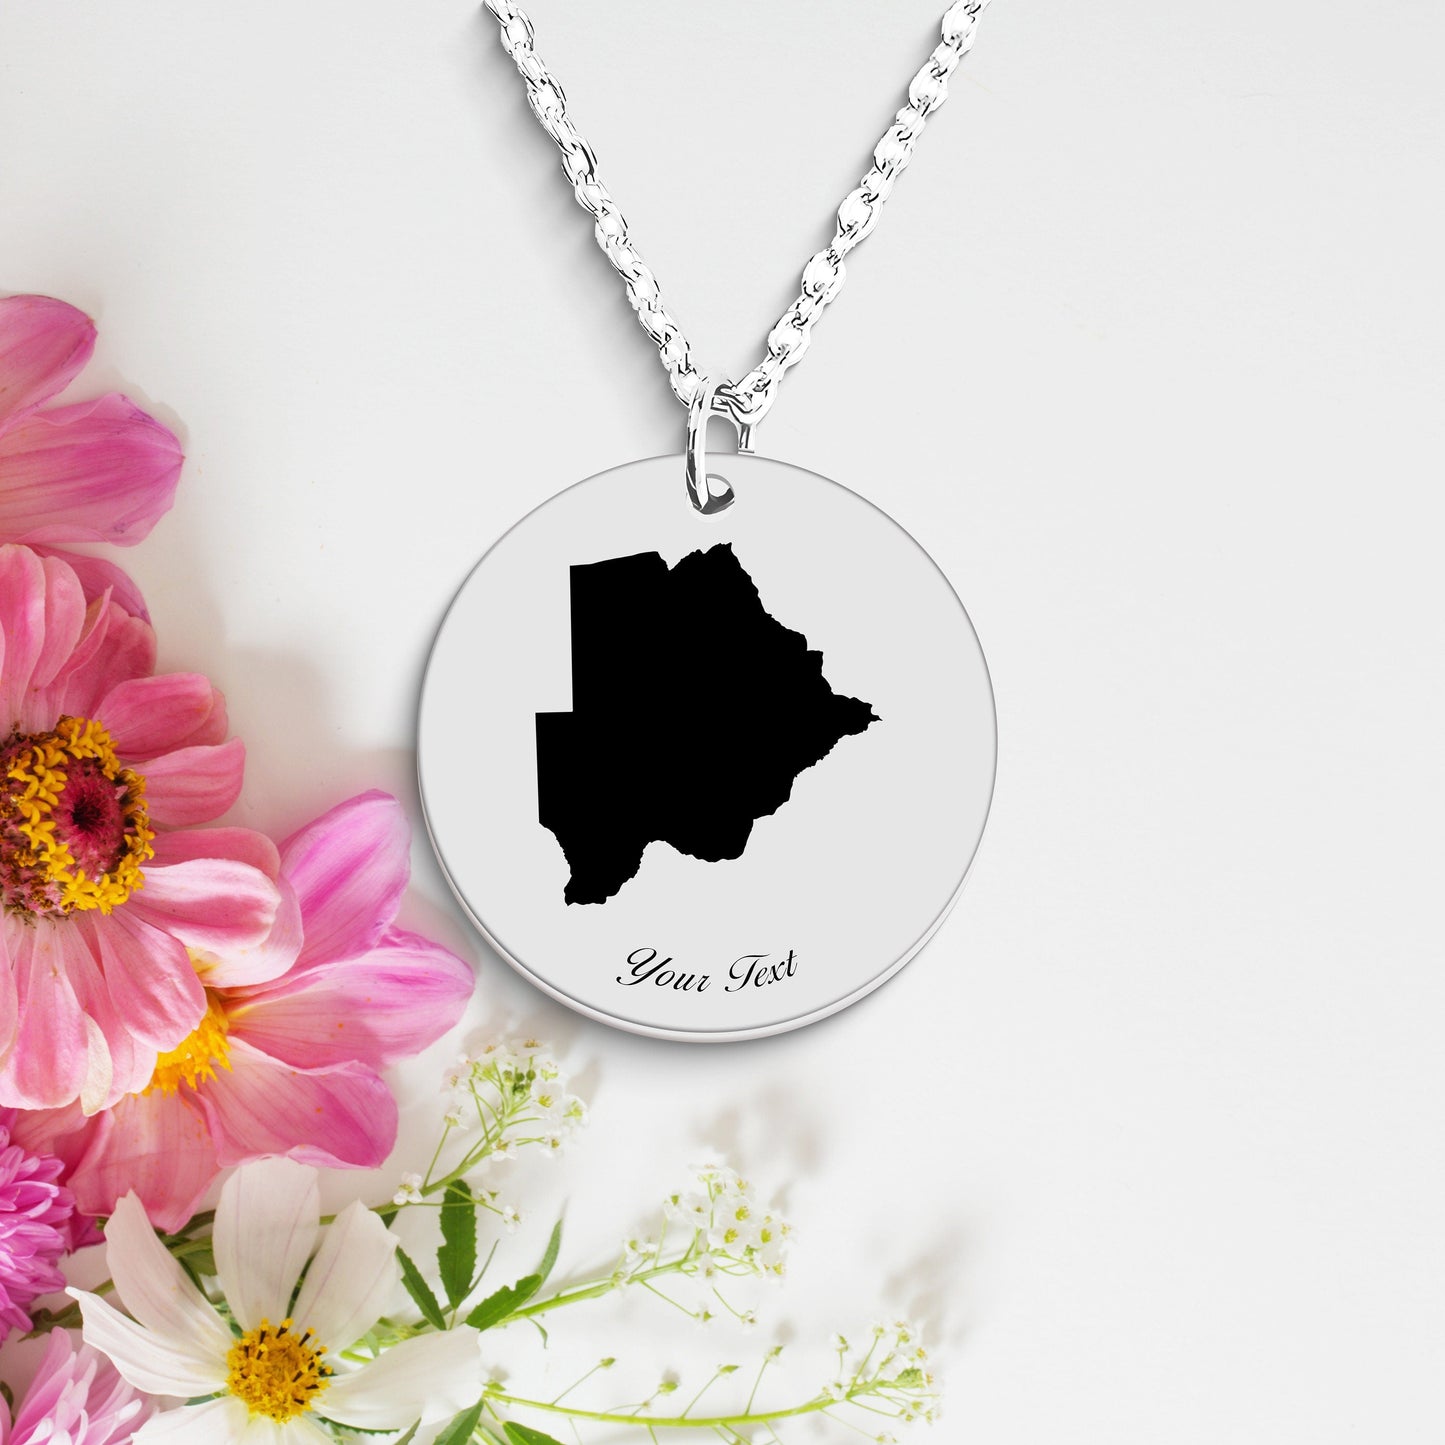 Botswana Country Map Necklace, Your Name Necklace, Minimalist Necklace, Personalized Gift, Silver Necklace, Gift For Him Her